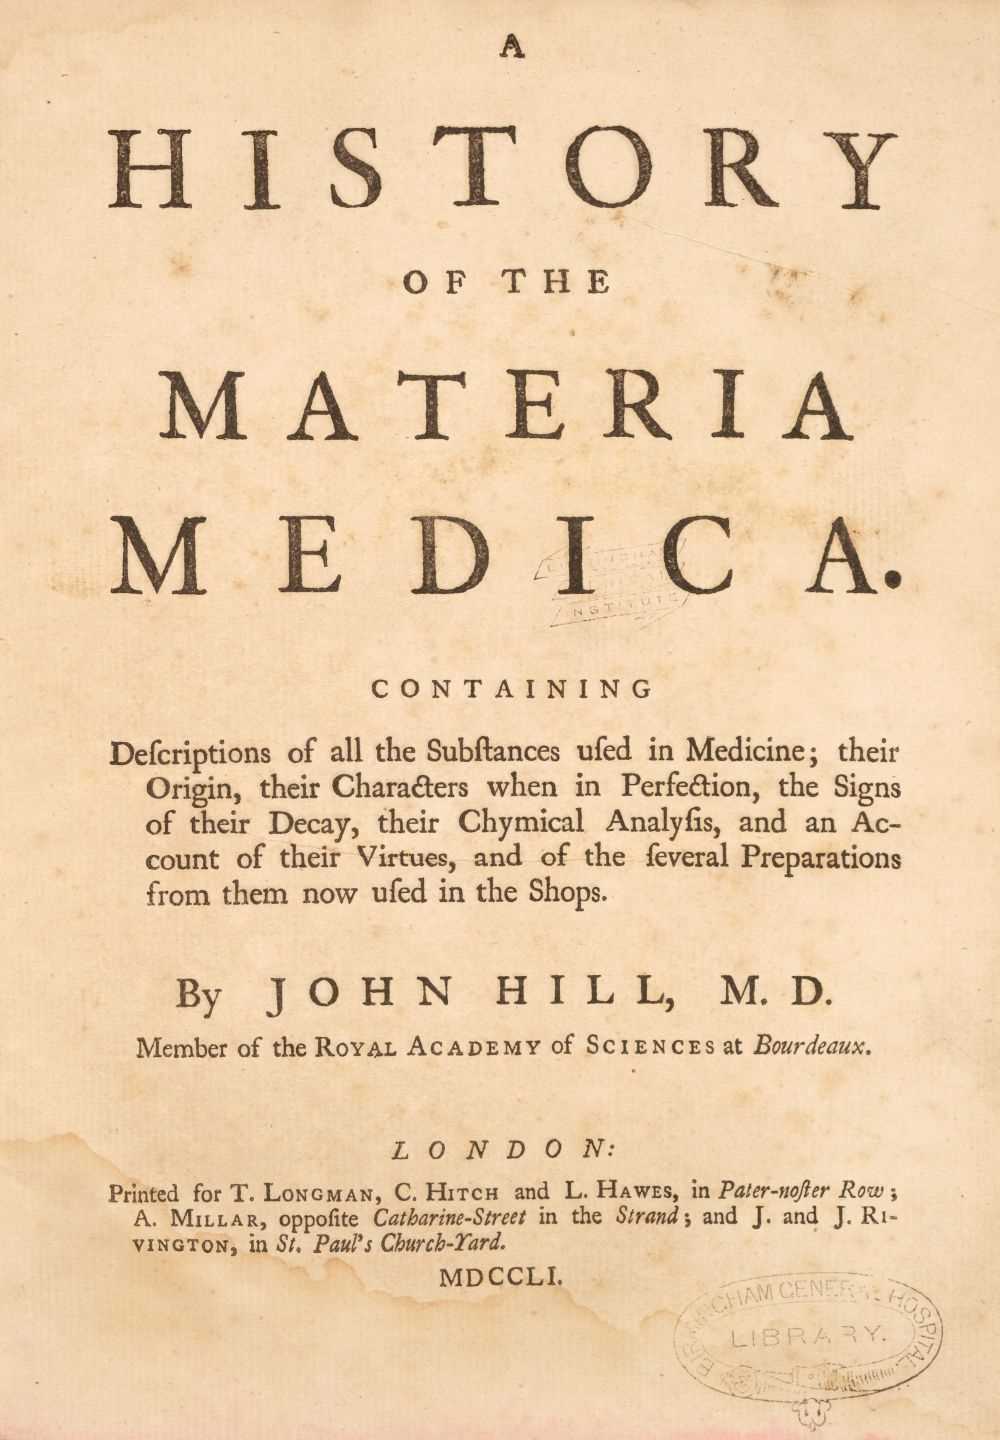 Lot 293 - Hill (John). A History of the Materia Medica, 1st edition, 1751